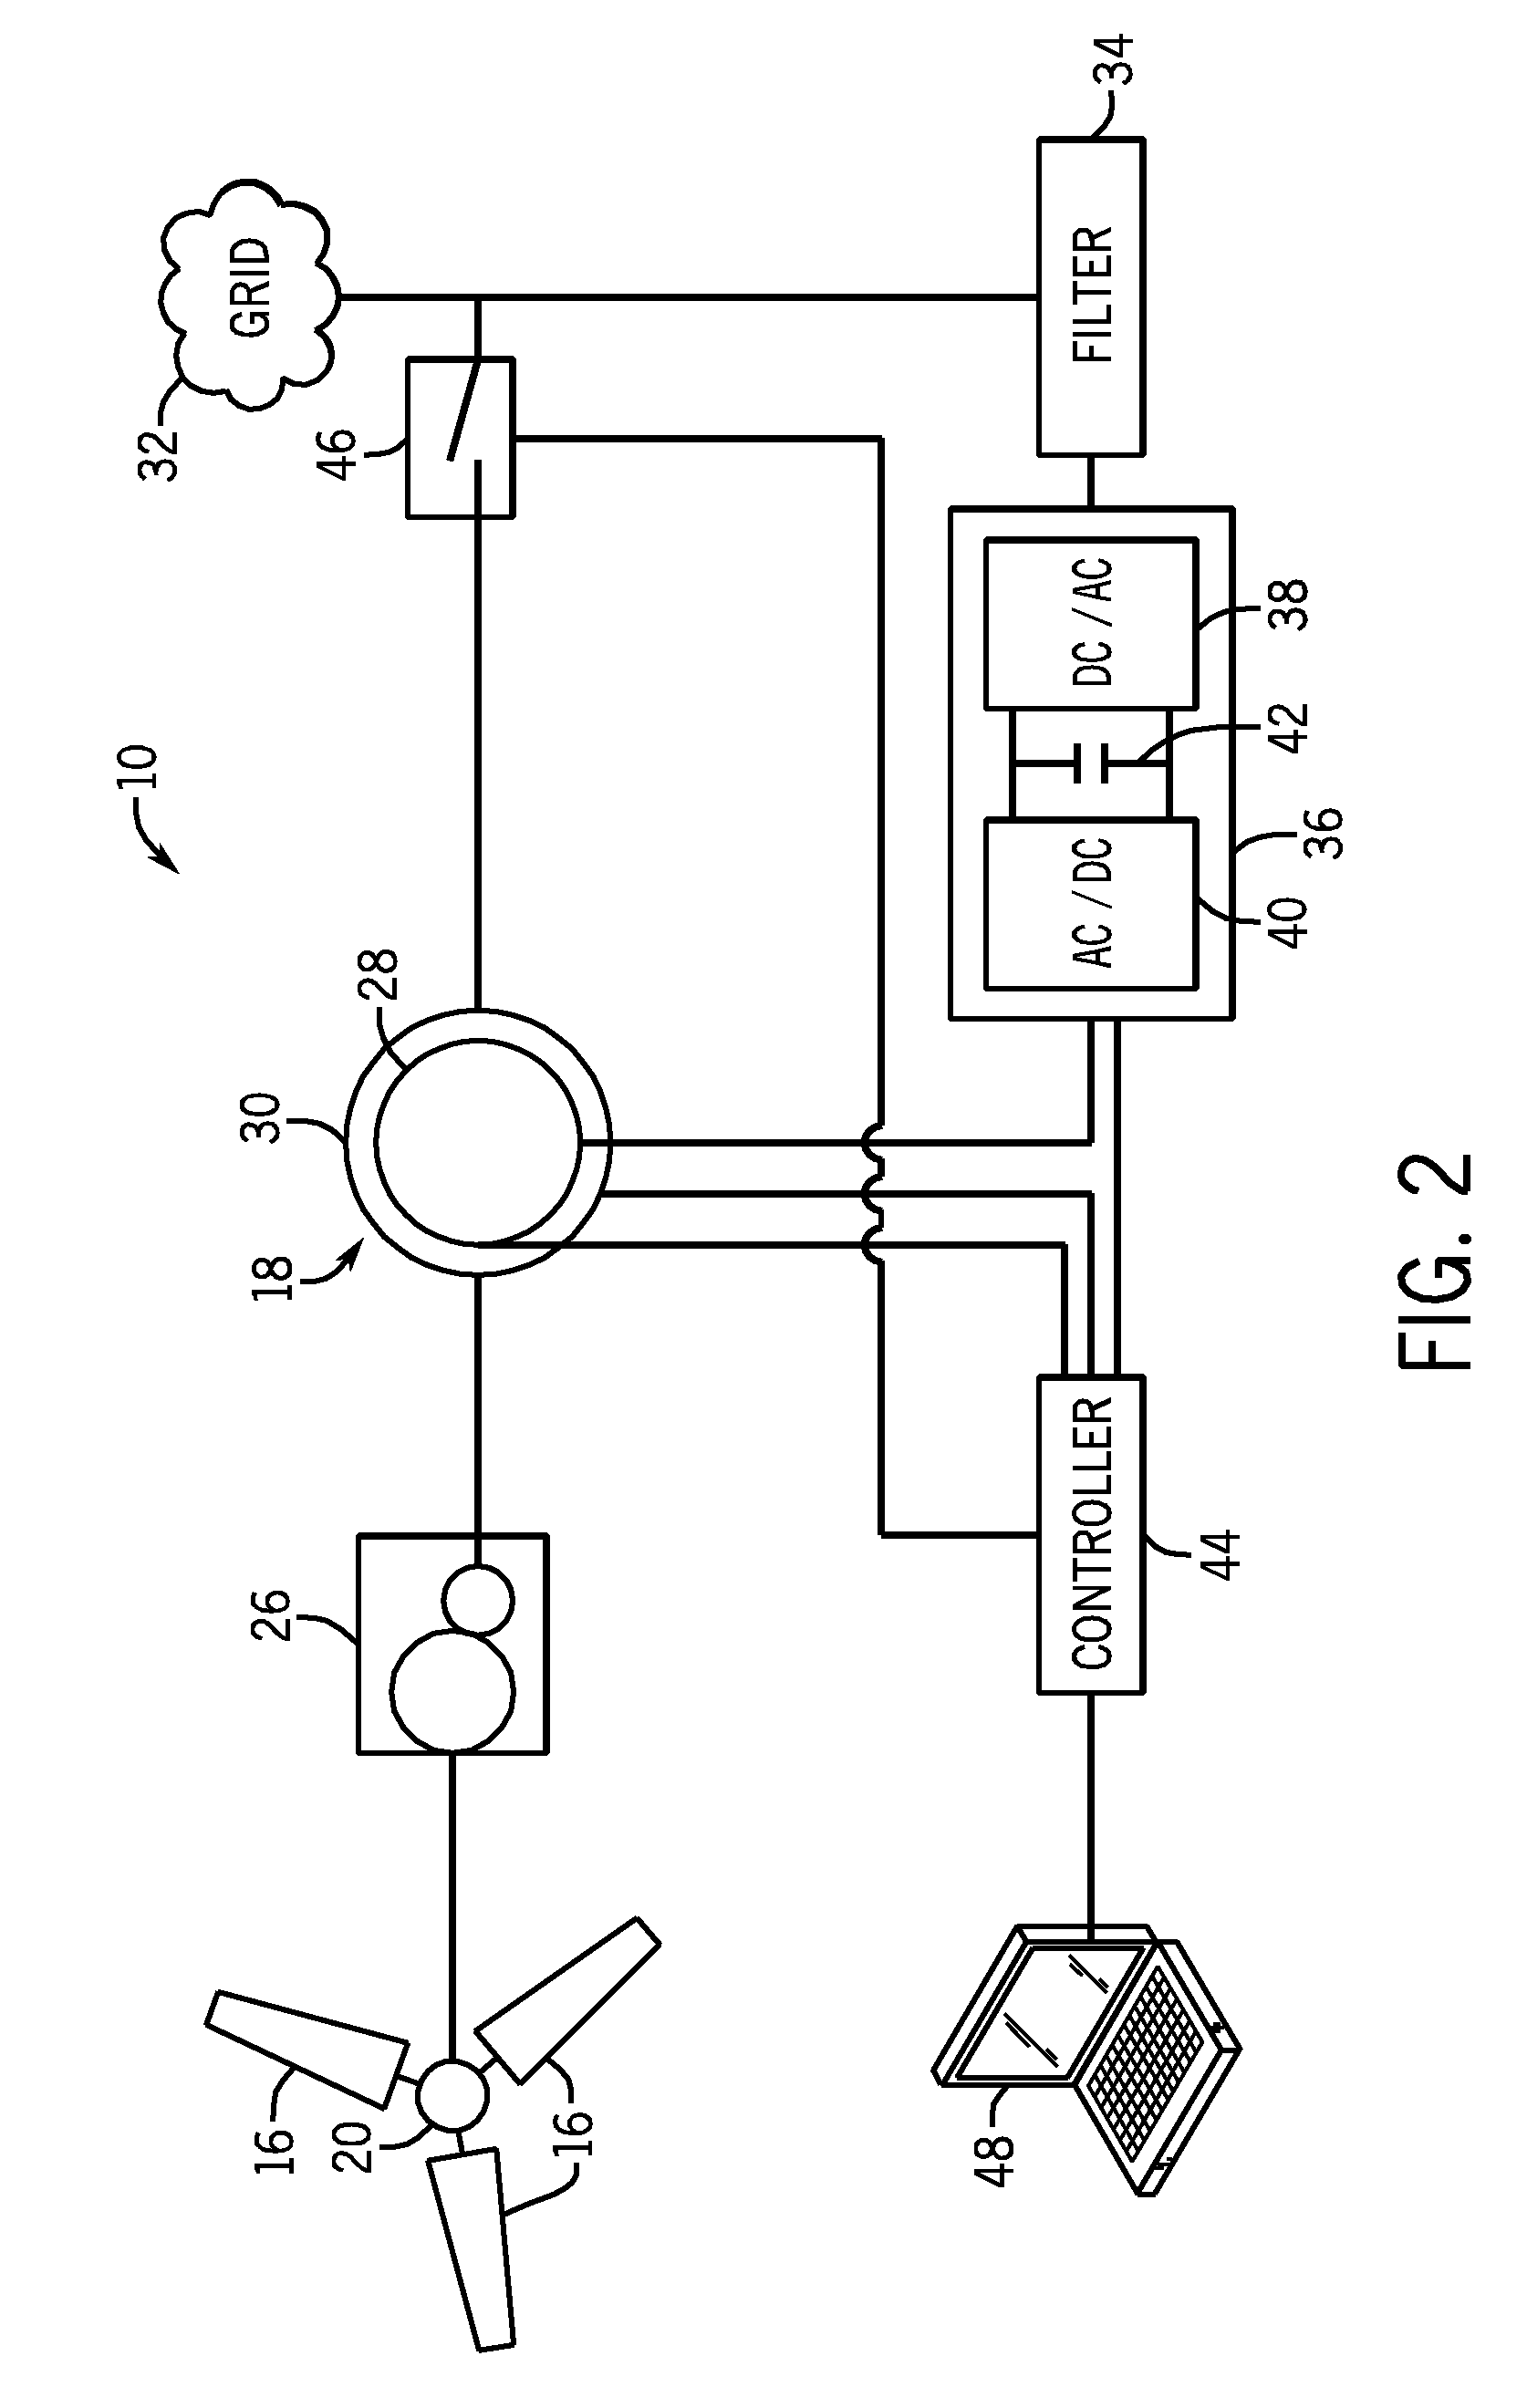 System for detecting generator winding faults